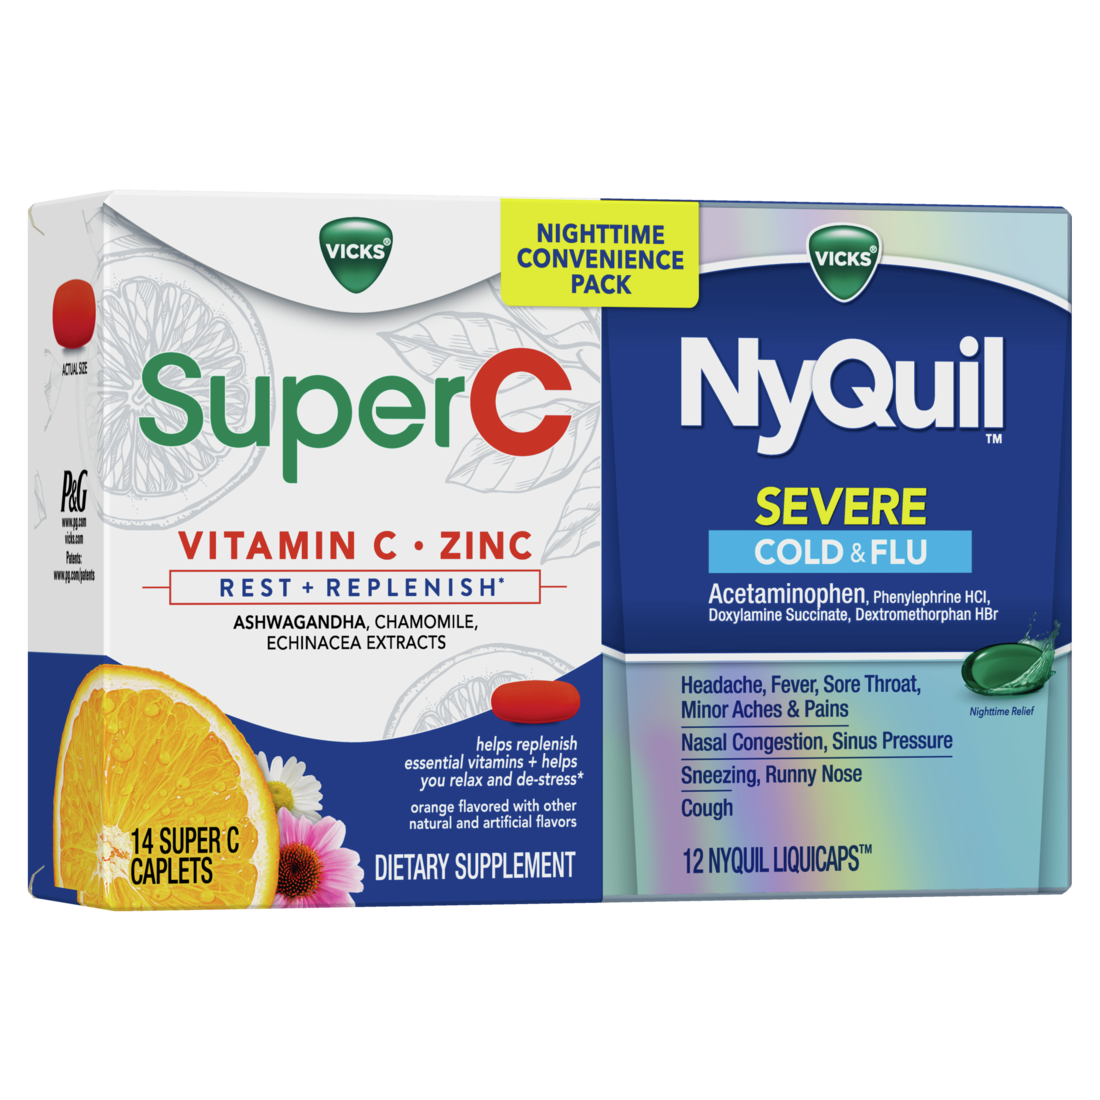 Vicks NyQuil Severe + Super C Convenience Pack left